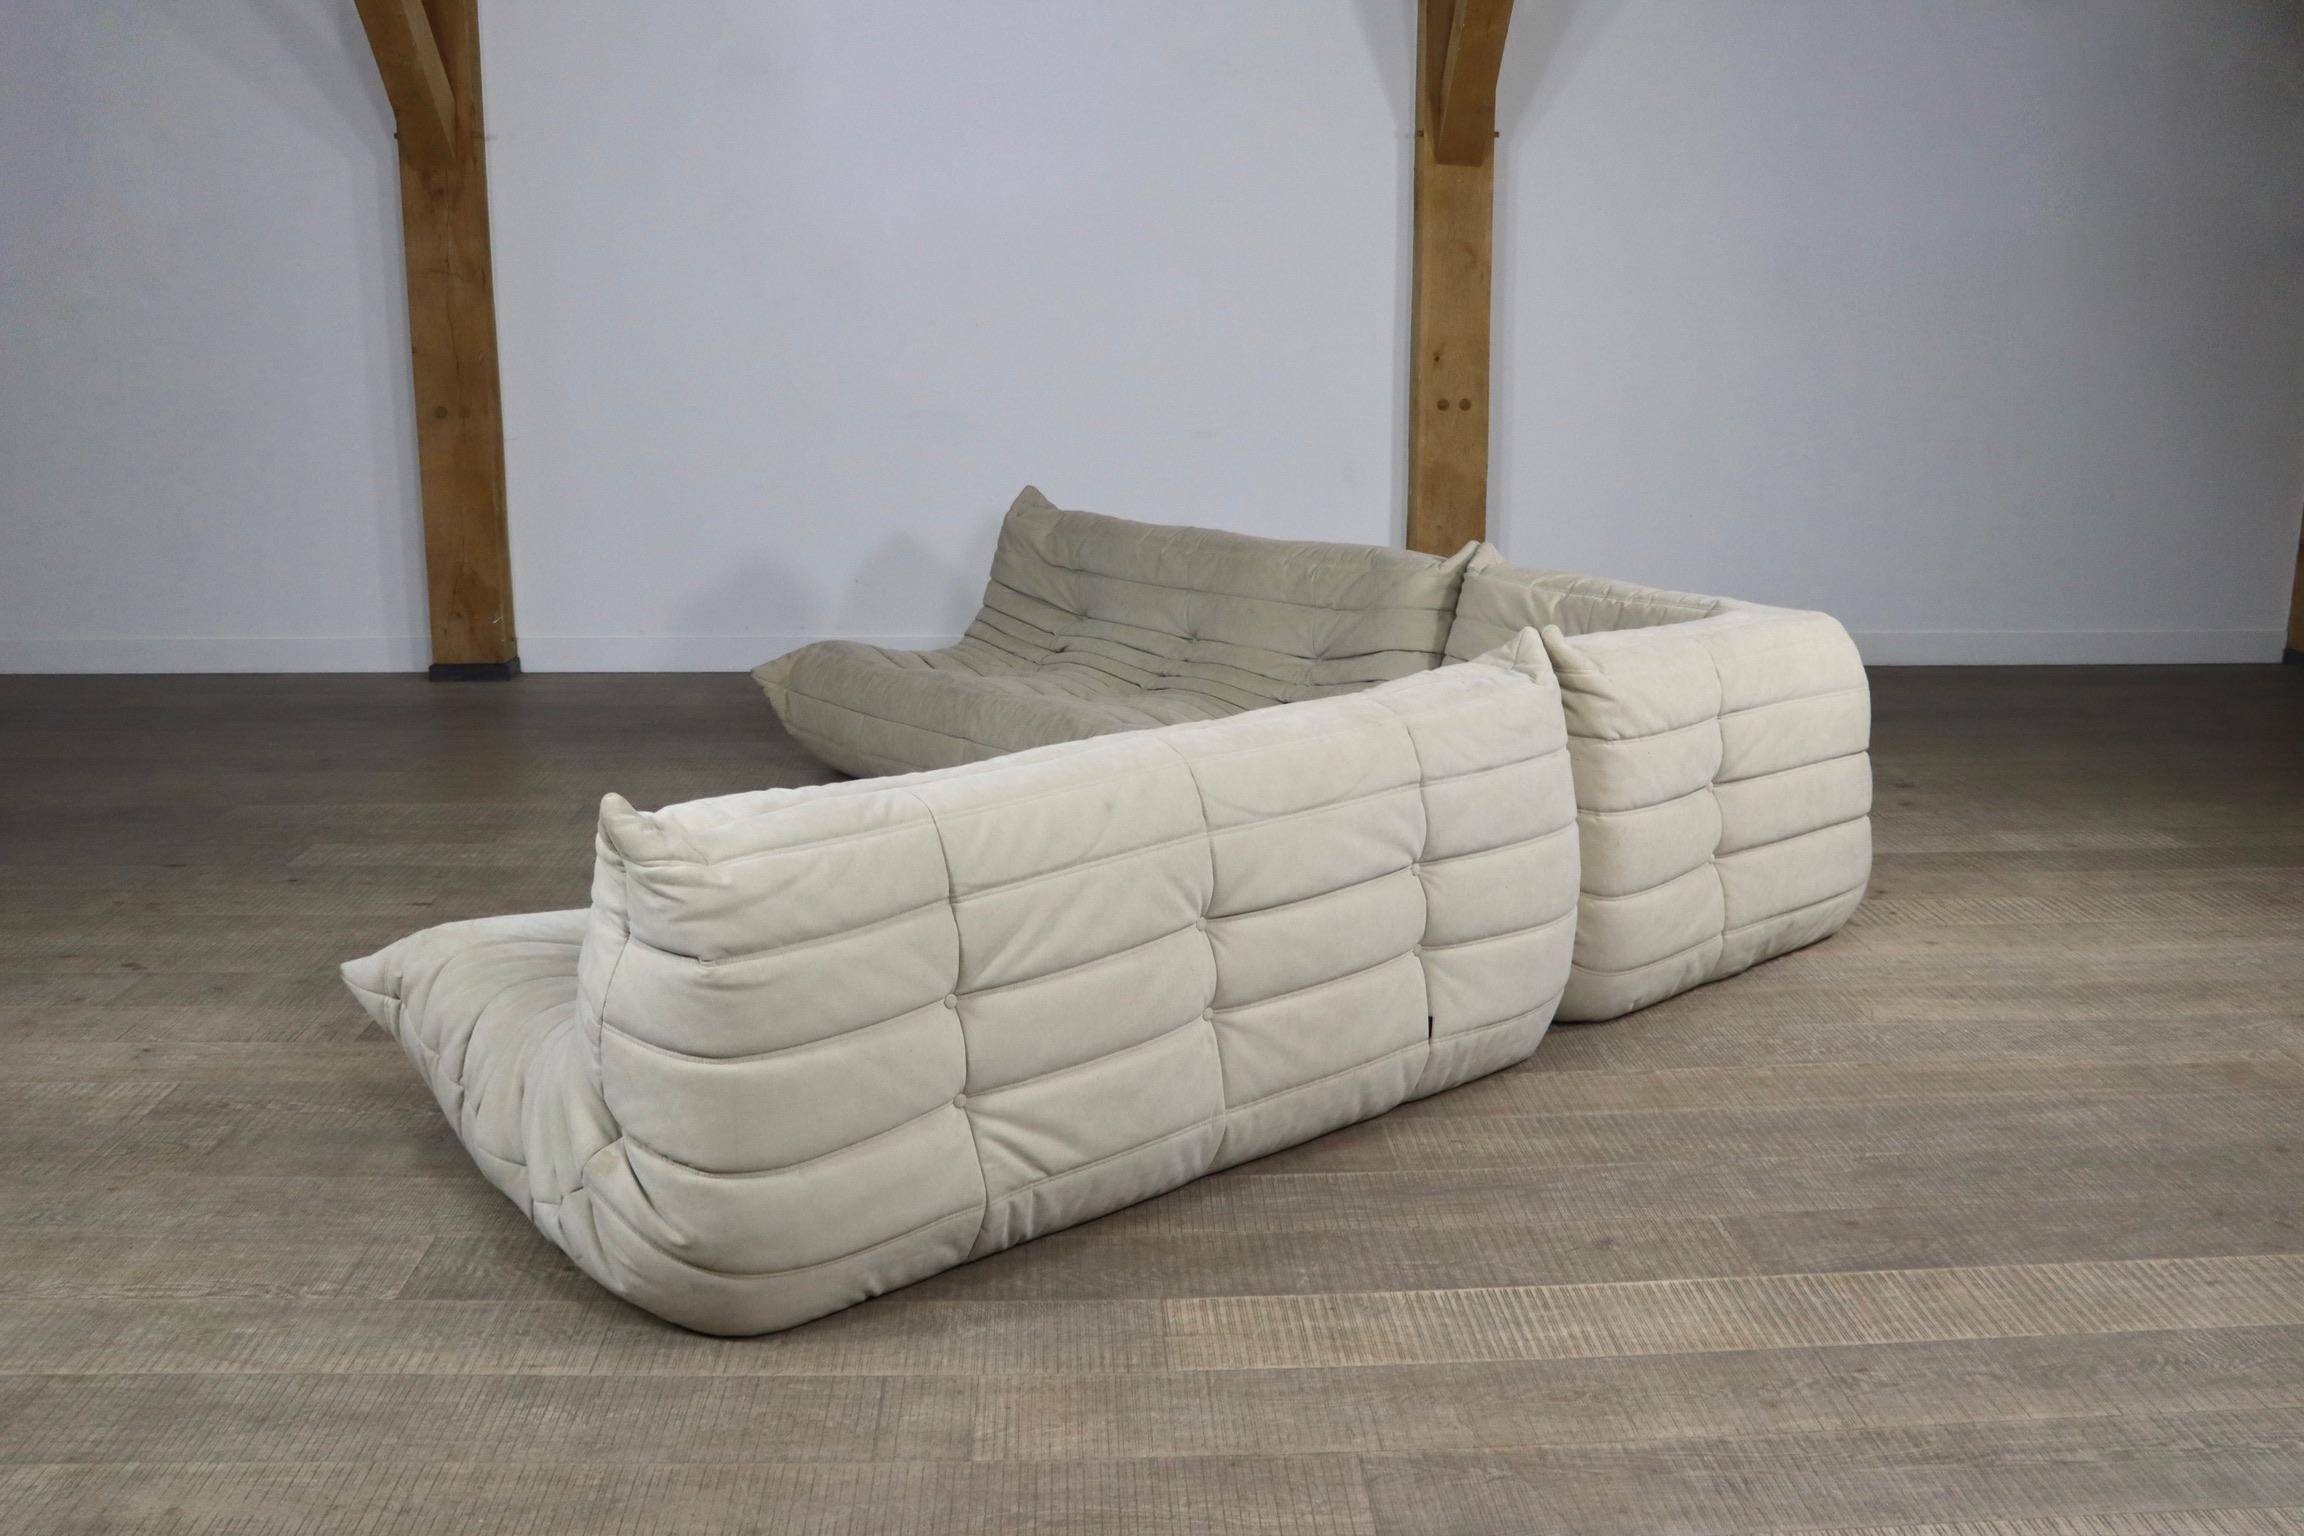 Upholstery Original Ligne Roset Togo Seating Group in Cream by Michel Ducaroy